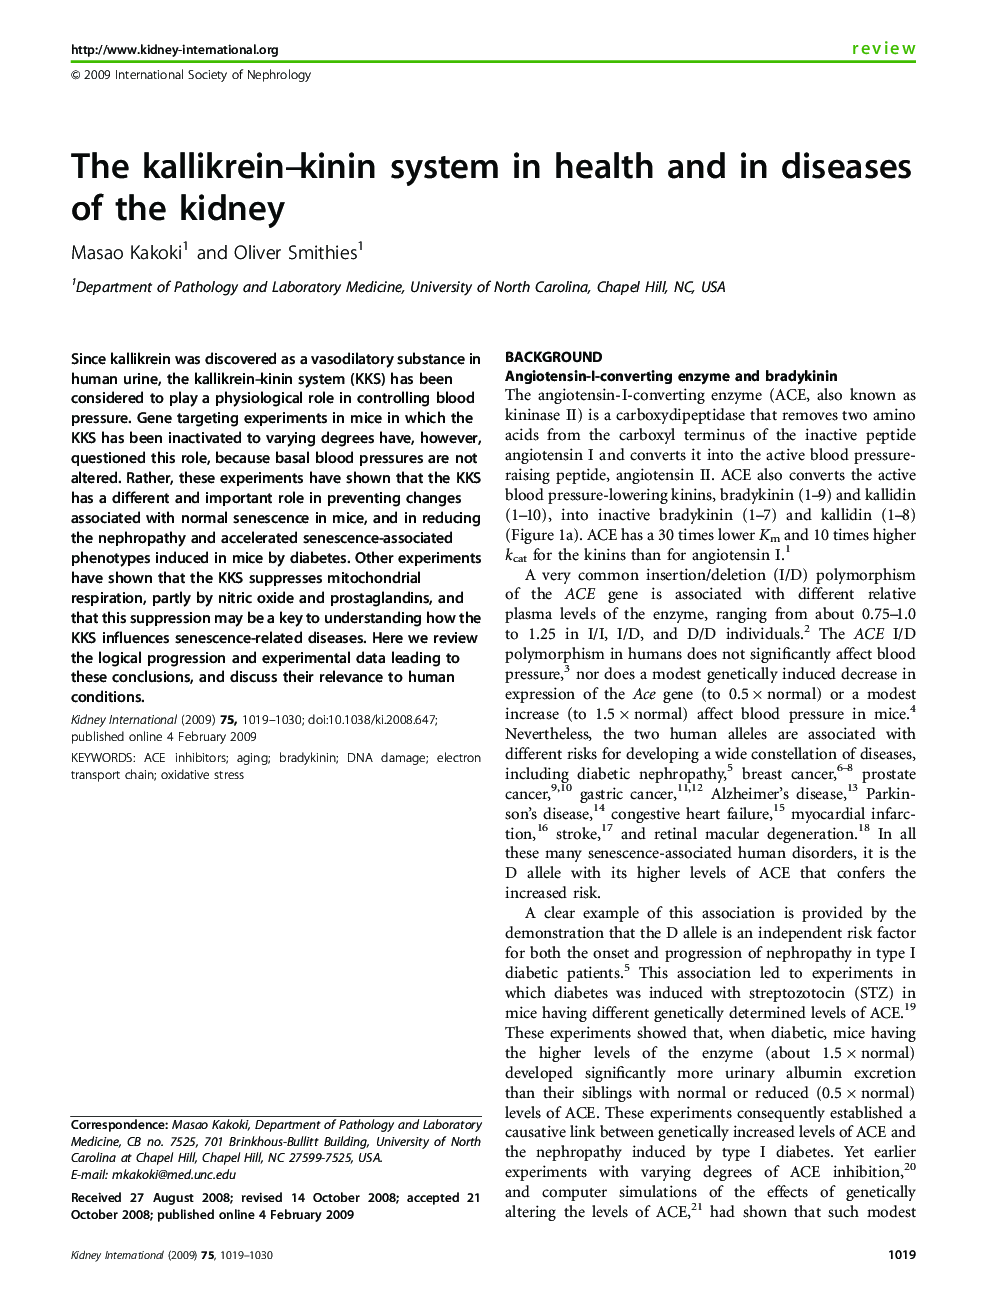 The kallikrein–kinin system in health and in diseases of the kidney